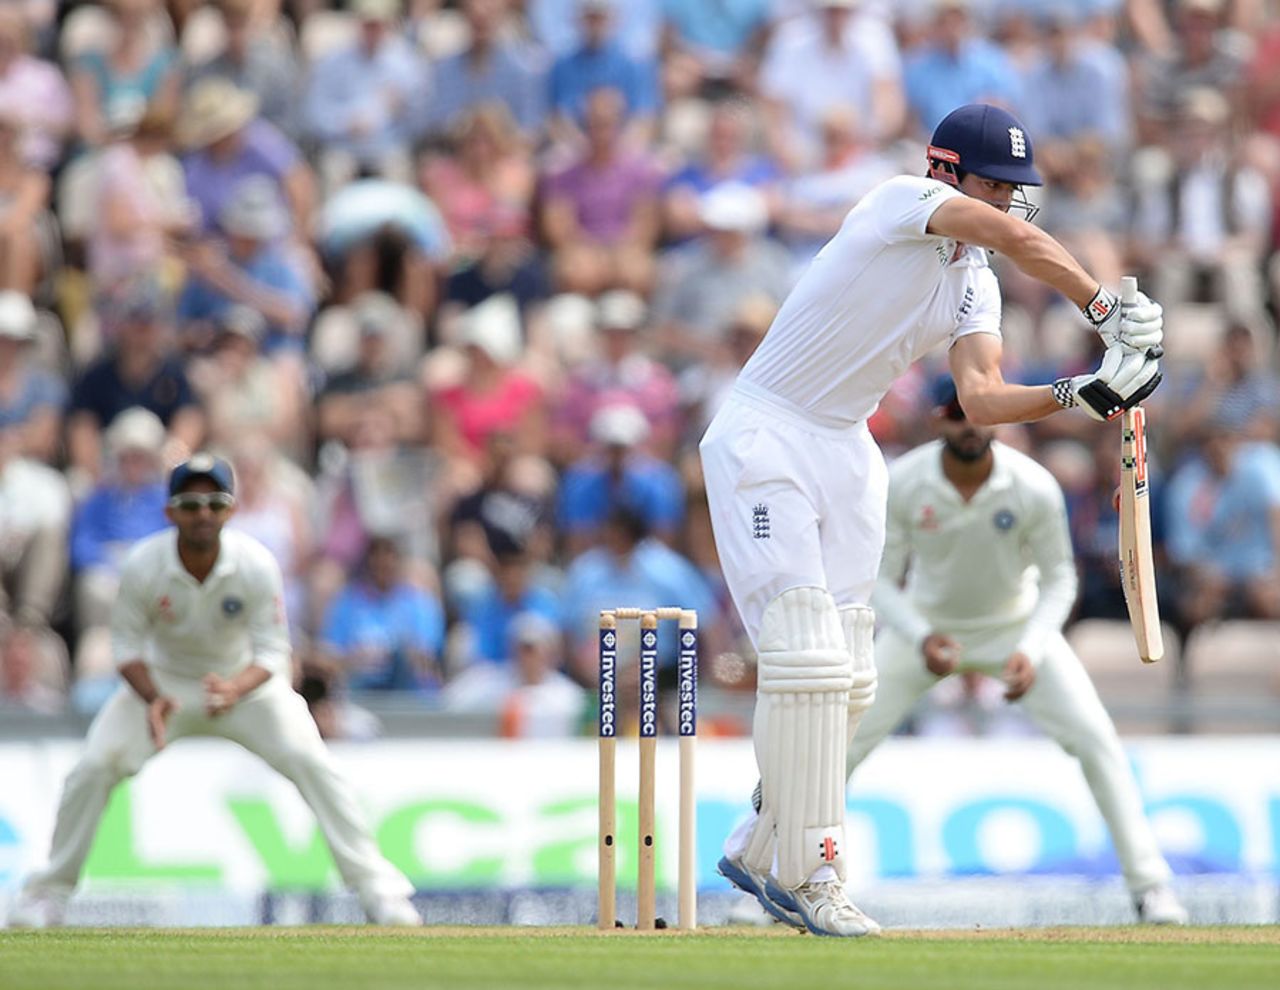 Alastair Cook gave a chance to third slip on 15 but was dropped by Ravindra Jadeja, England v India, 3rd Investec Test, Ageas Bowl, 1st day, July 27, 2014